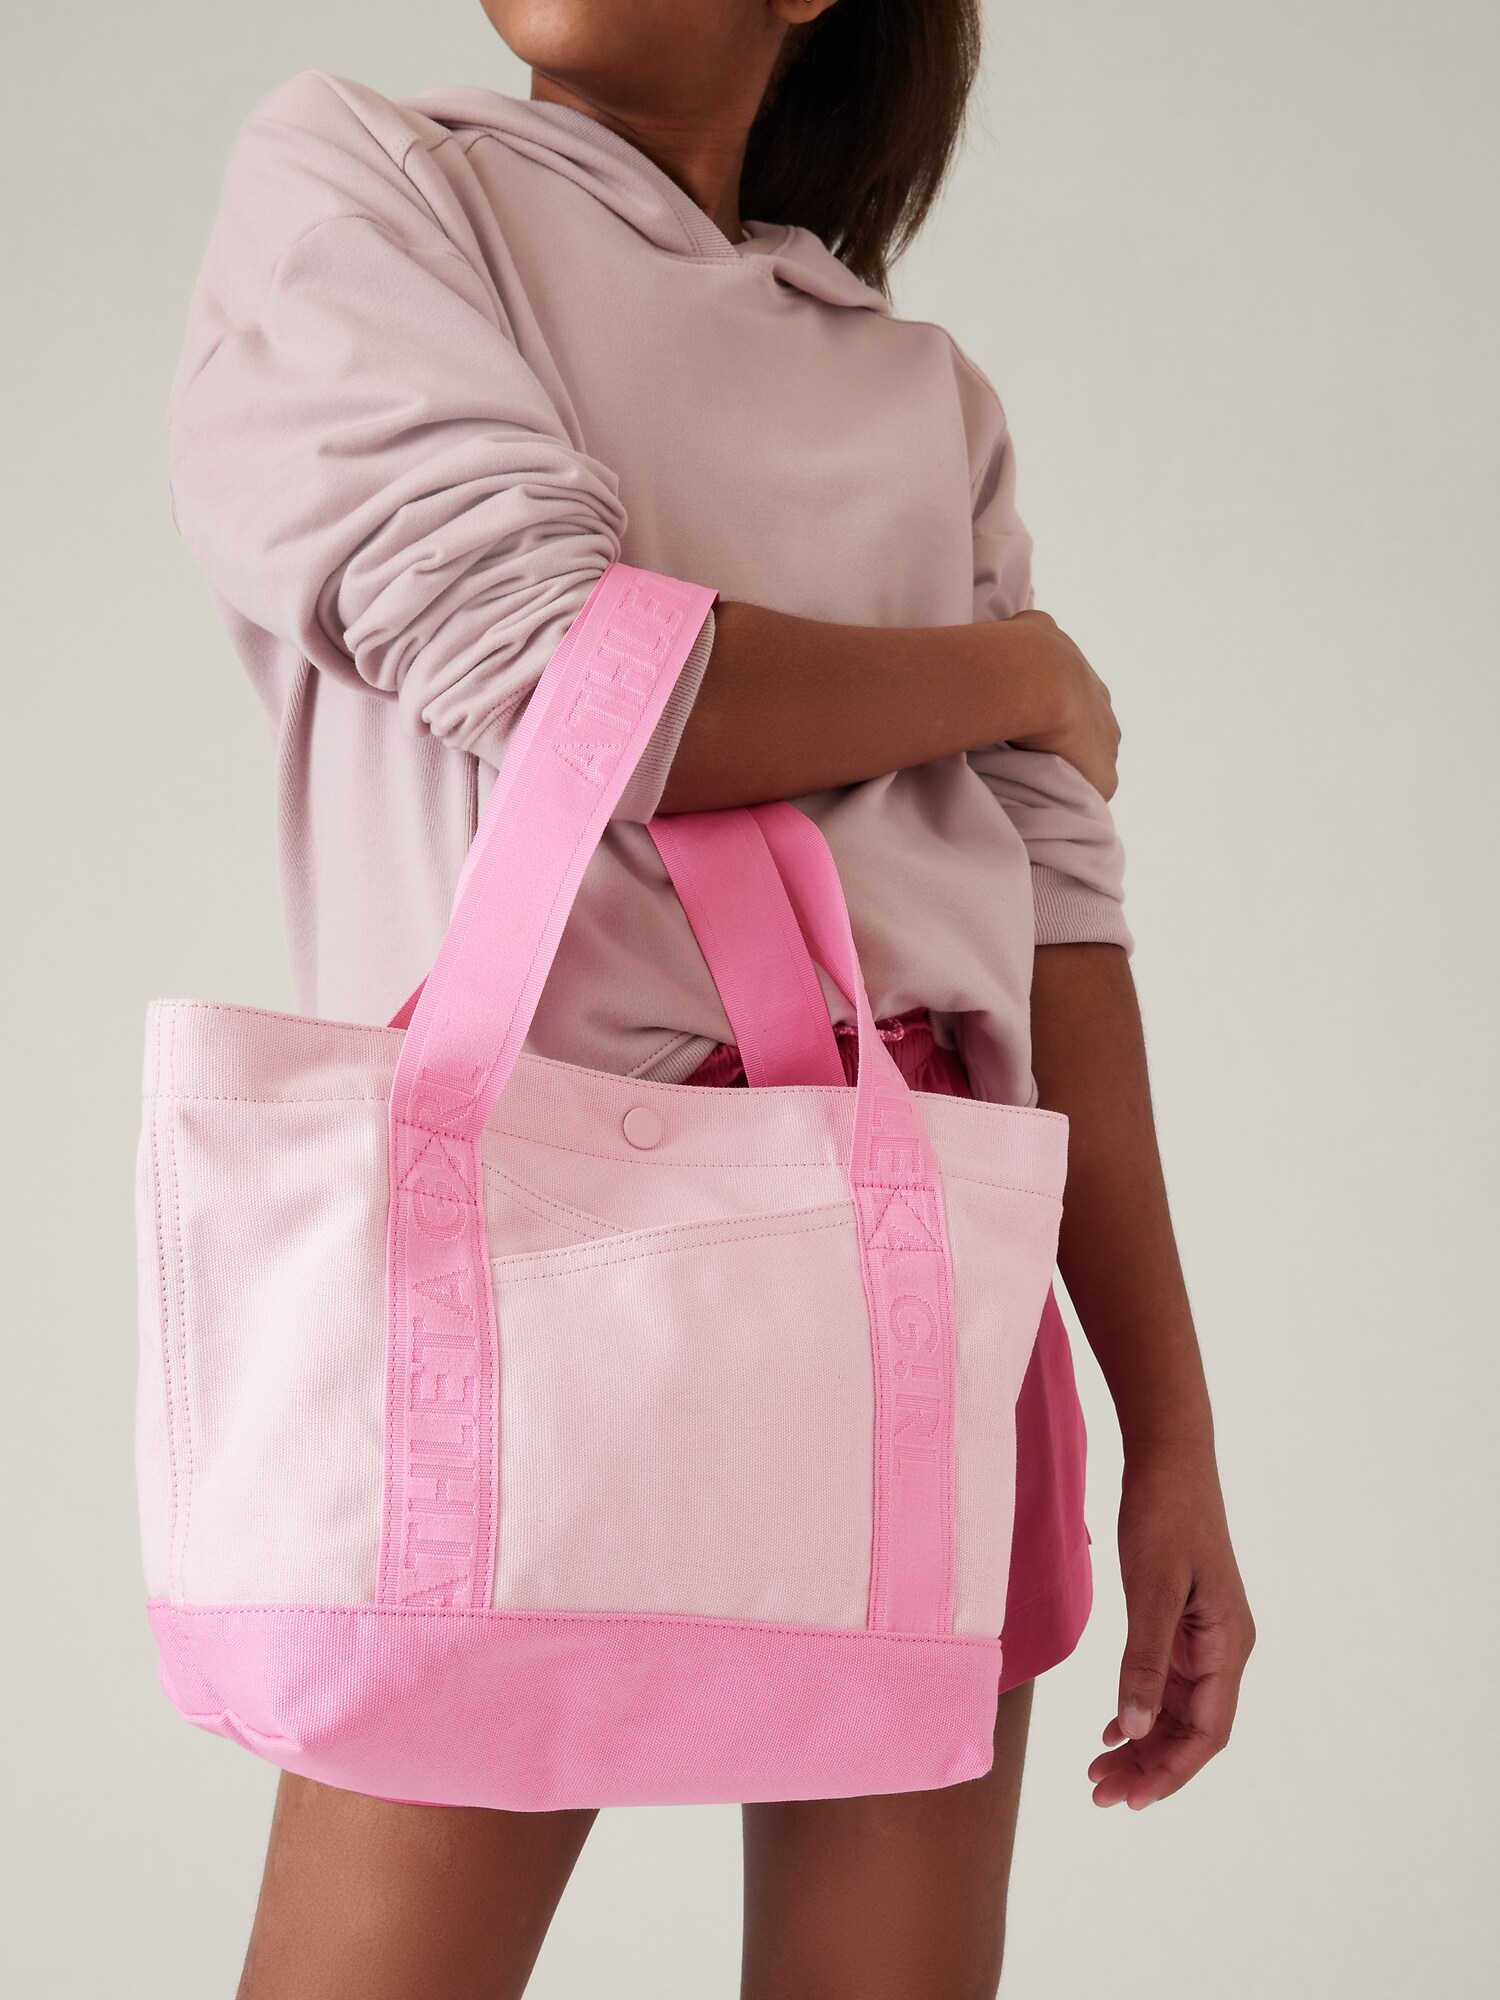 Athleta Girl Going Places Tote Bag pink. 1